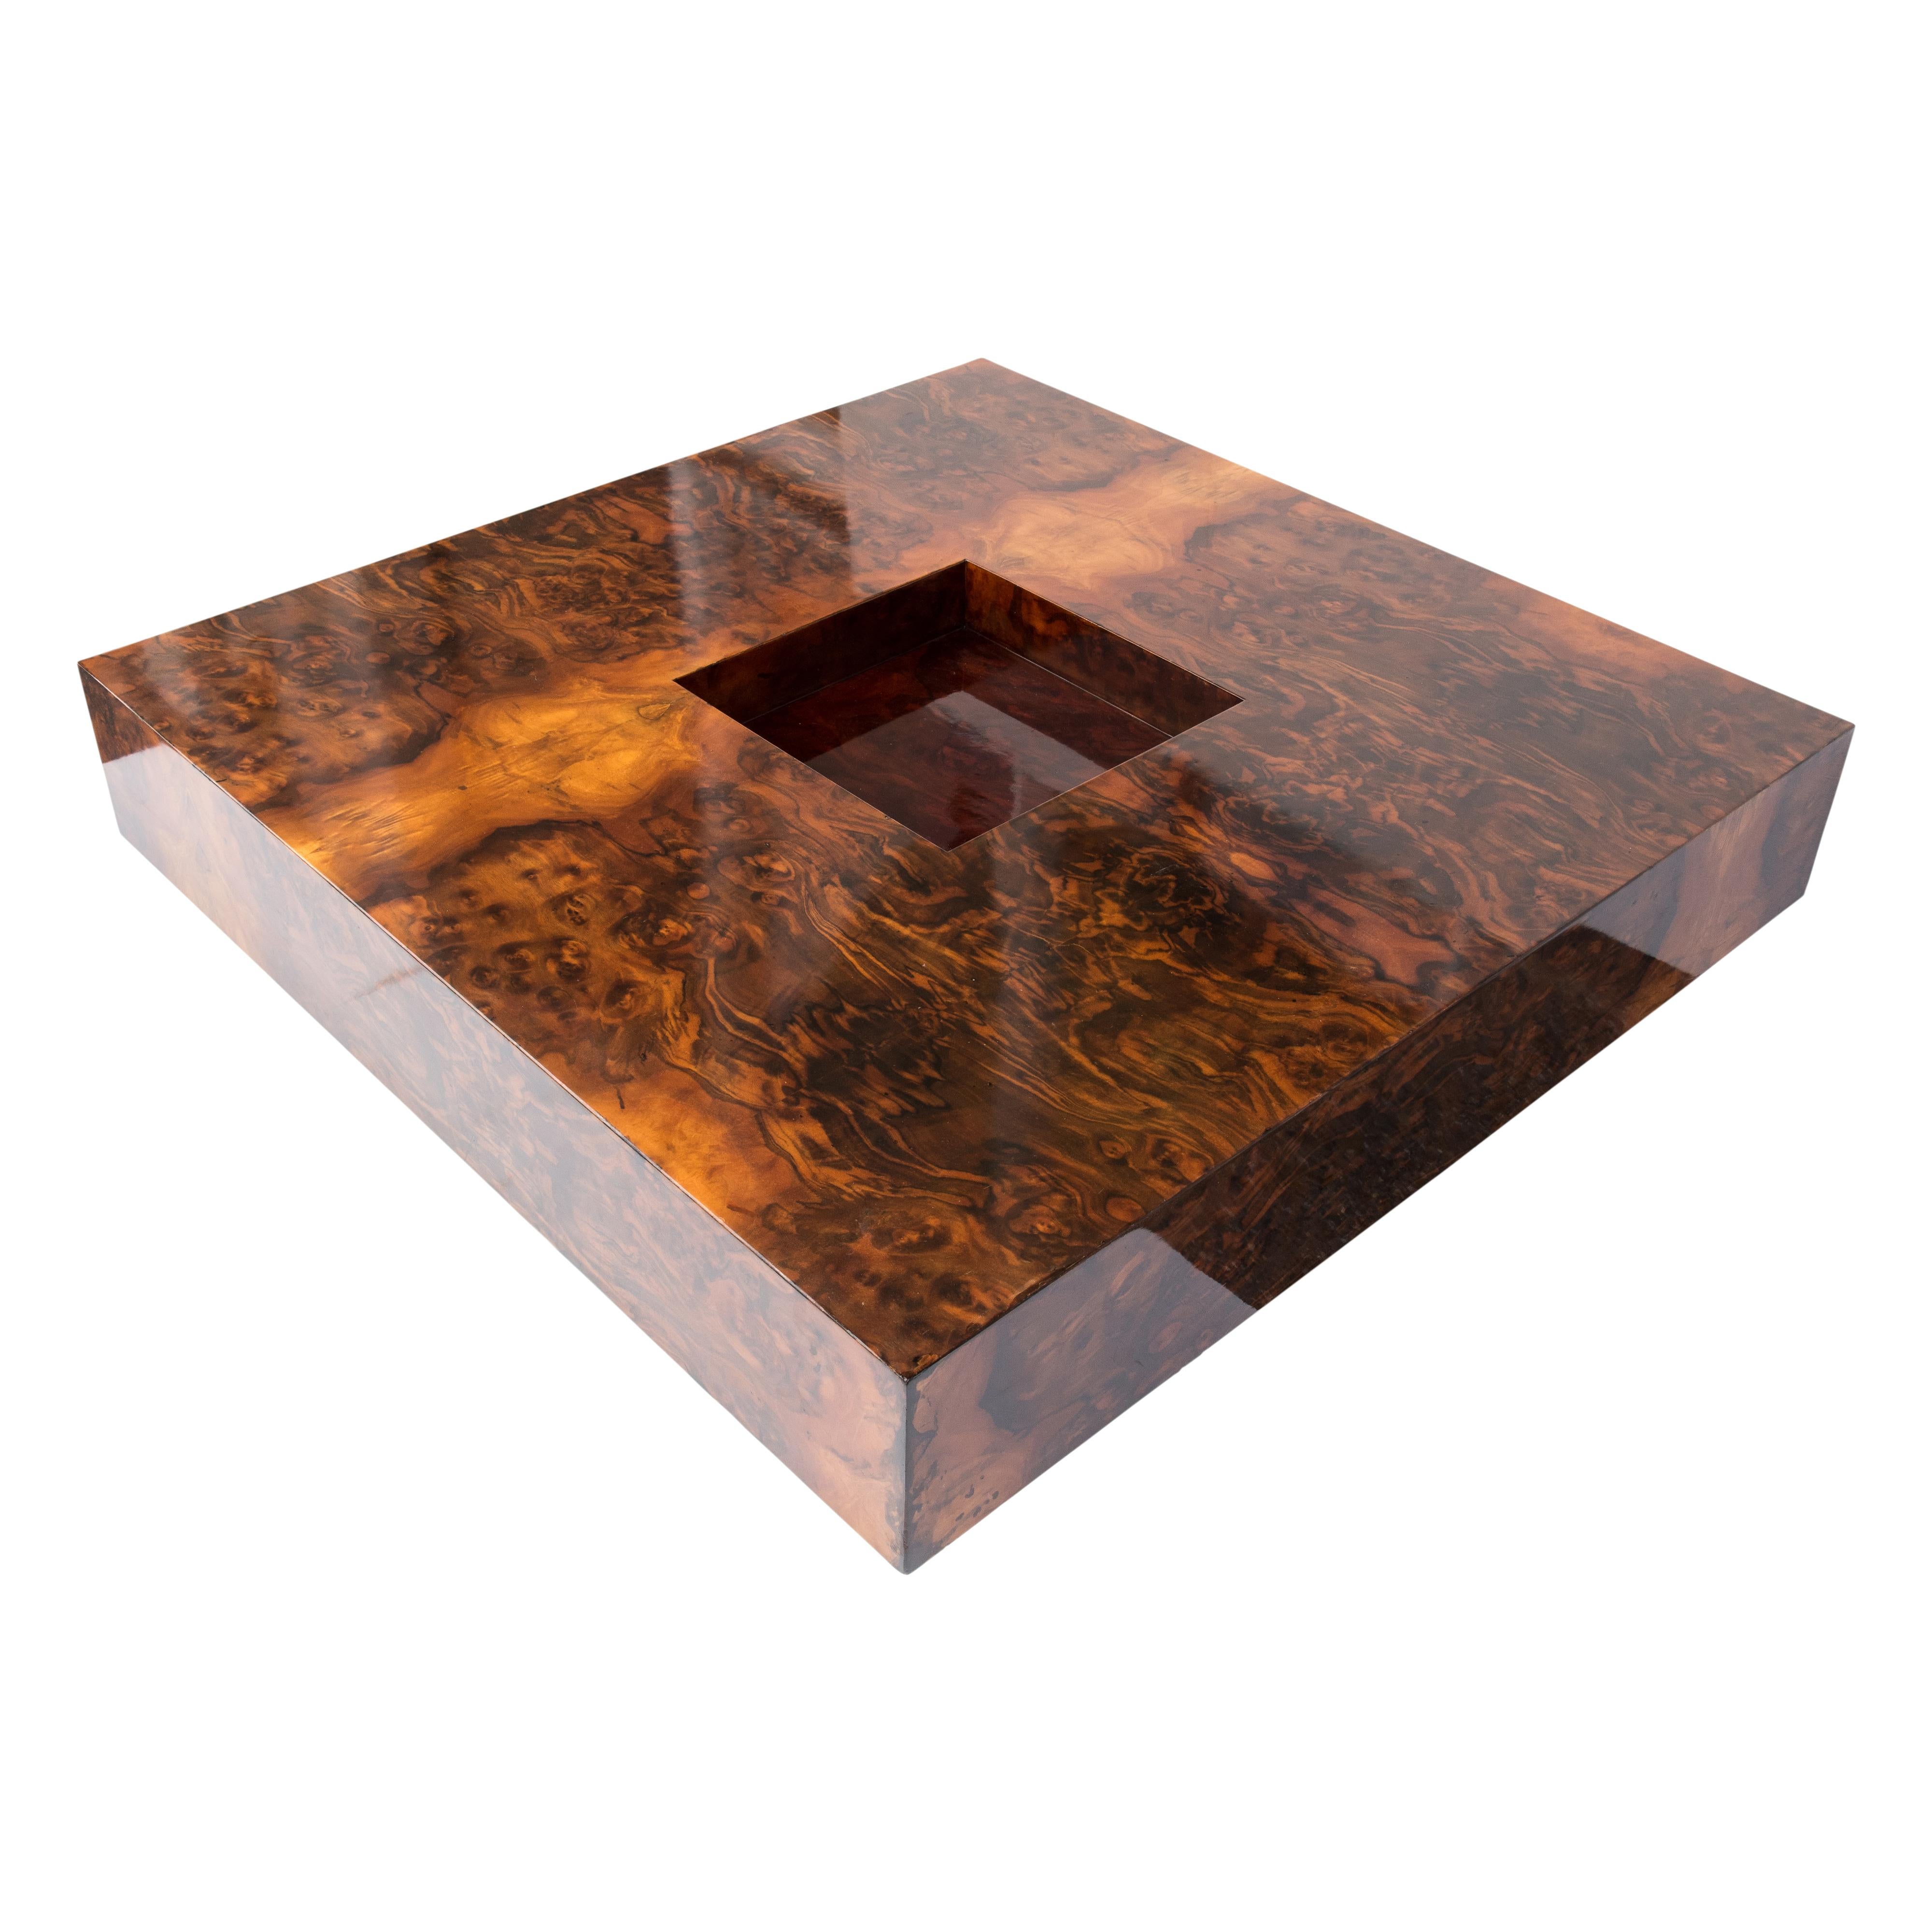 A 1970s modernist Italian design square shaped coffee table. Dark, polished, laminated walnut wood with a central inset for a bar use or decoration. Alveo table was produced by Sabot in the 1970s and designed by Willy Rizzo (1928-2013)
Willy